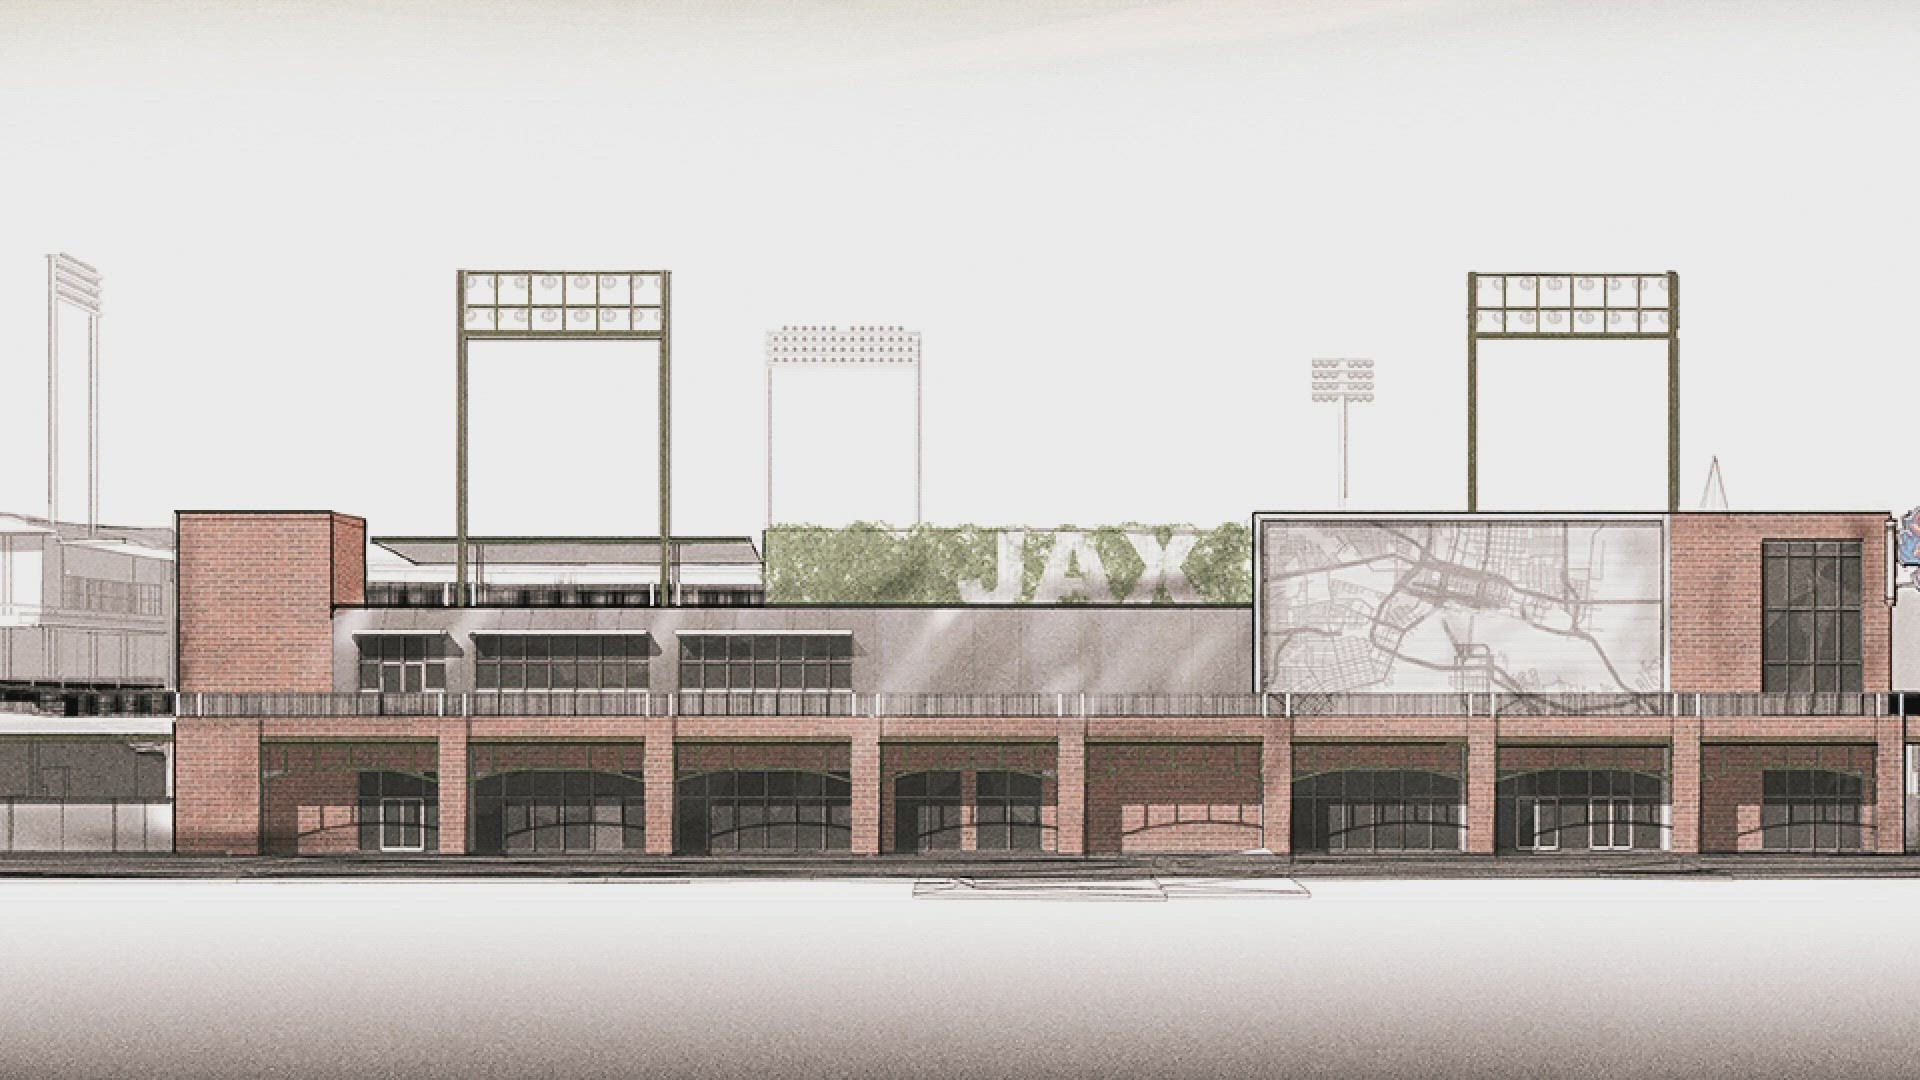 Renovations happening at the home of the Jacksonville Jumbo Shrimp will take place over the next 6-12 months, according to Jumbo Shrimp owner/CEO Ken Babby.